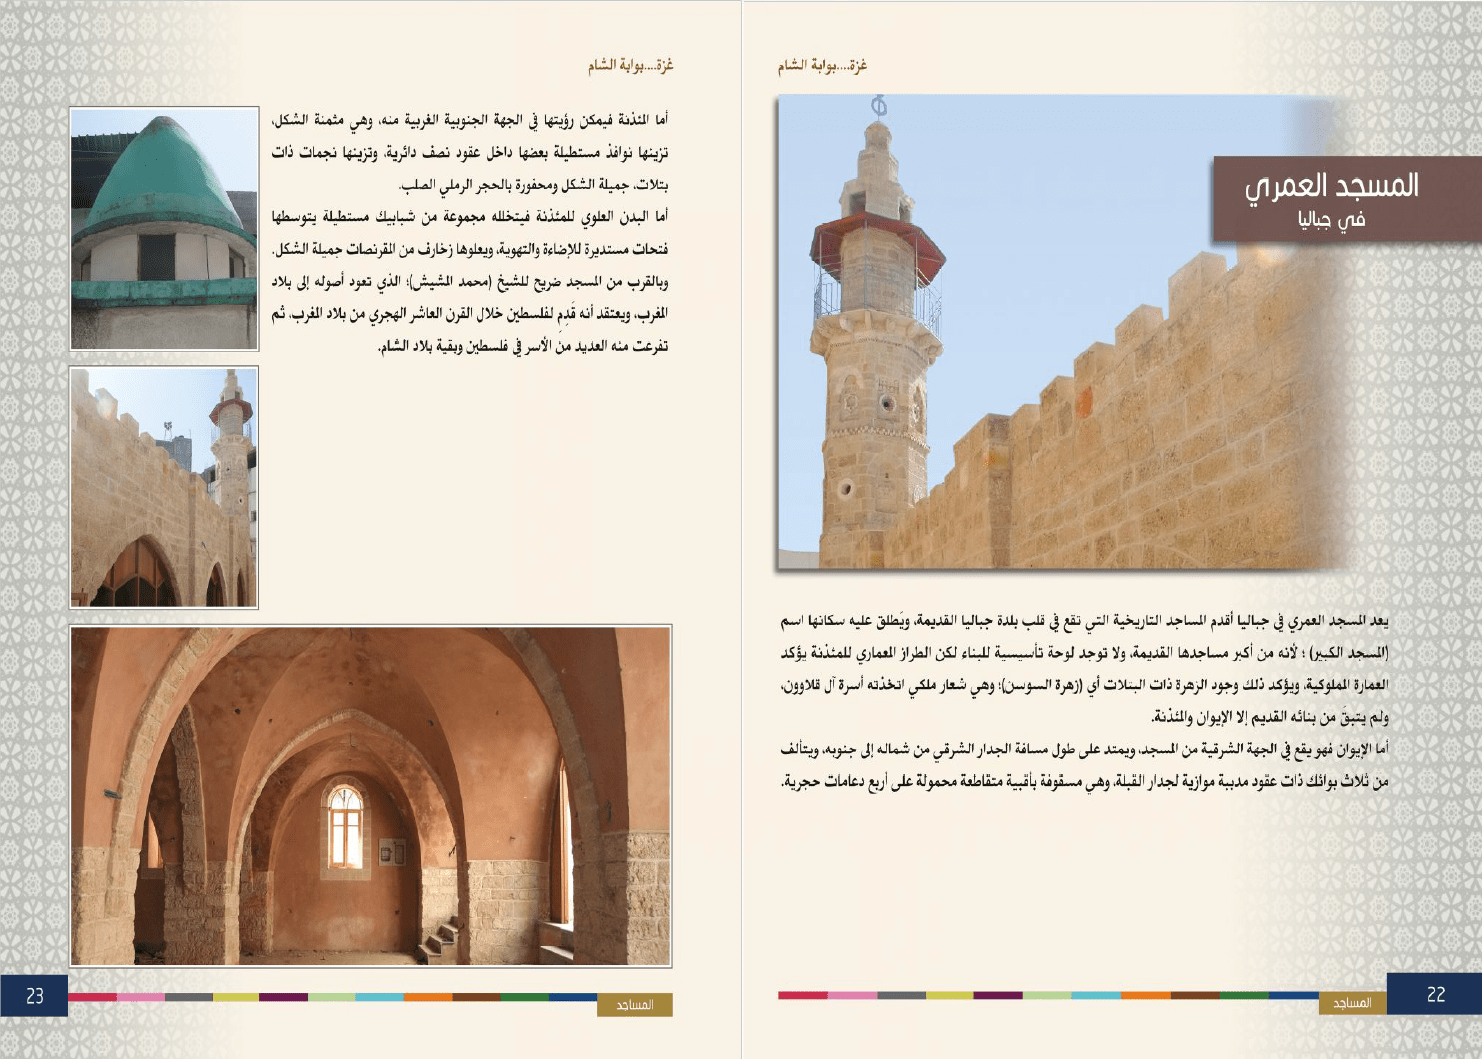 An image from the archeological guide, Gaza… Gate to the Levant, containing information about the Al-Omari Mosque in Jabalia.